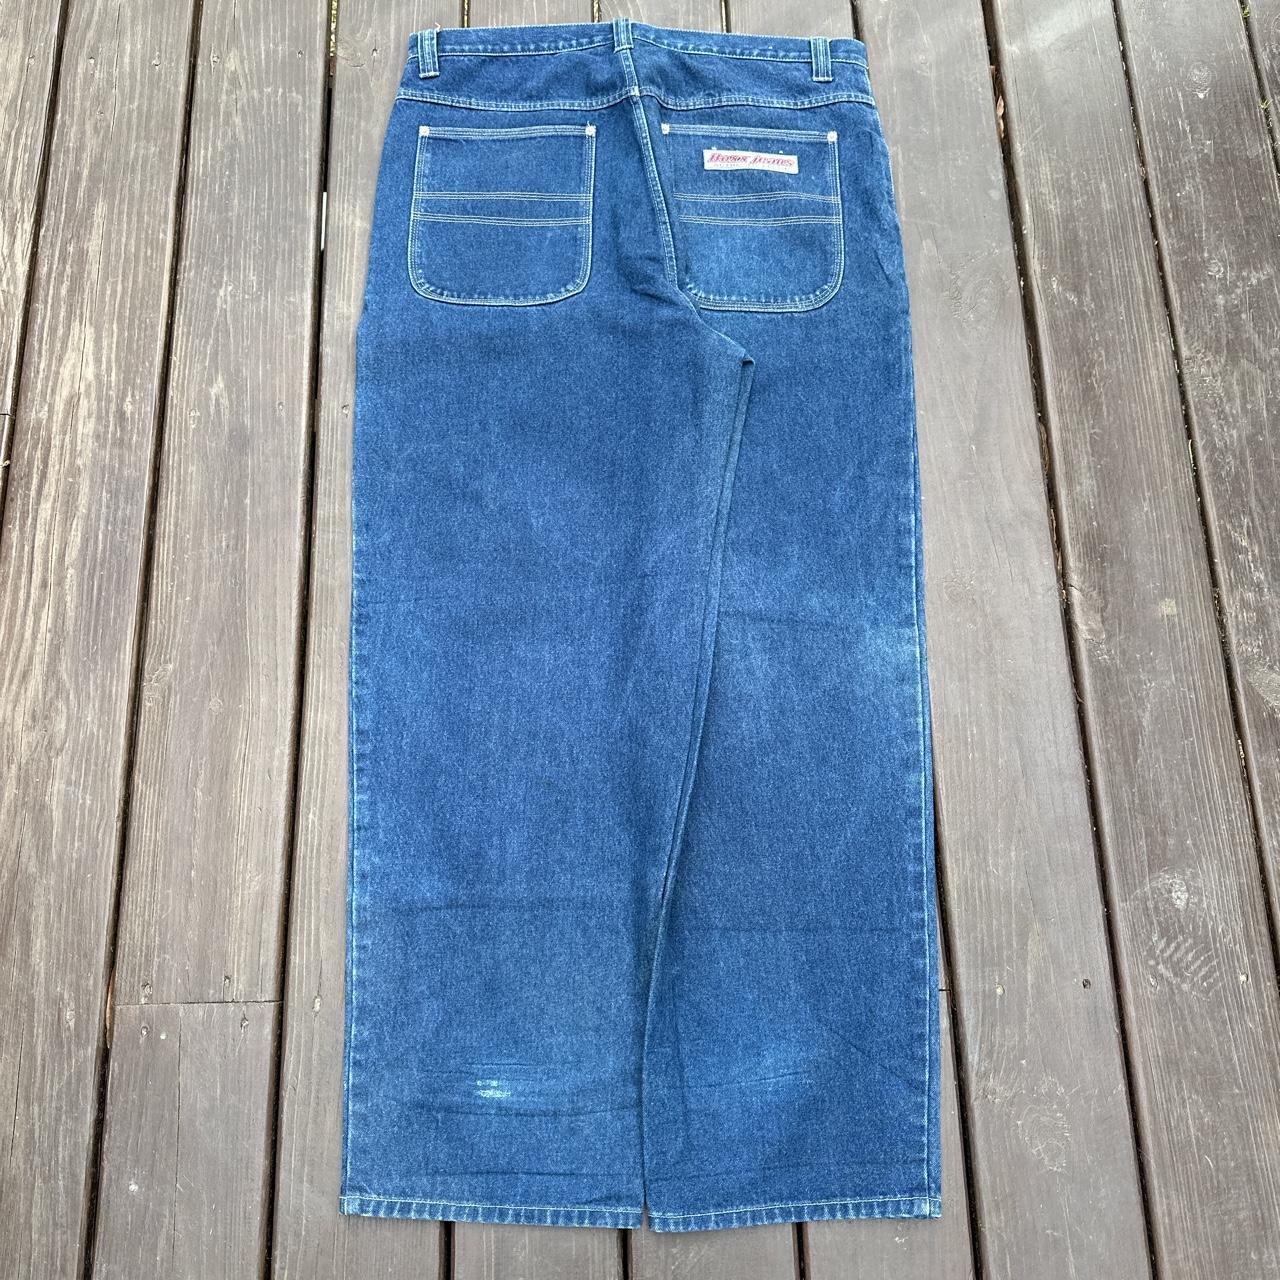 Boxx Jeans Theyre in Great Condition Measurements... - Depop